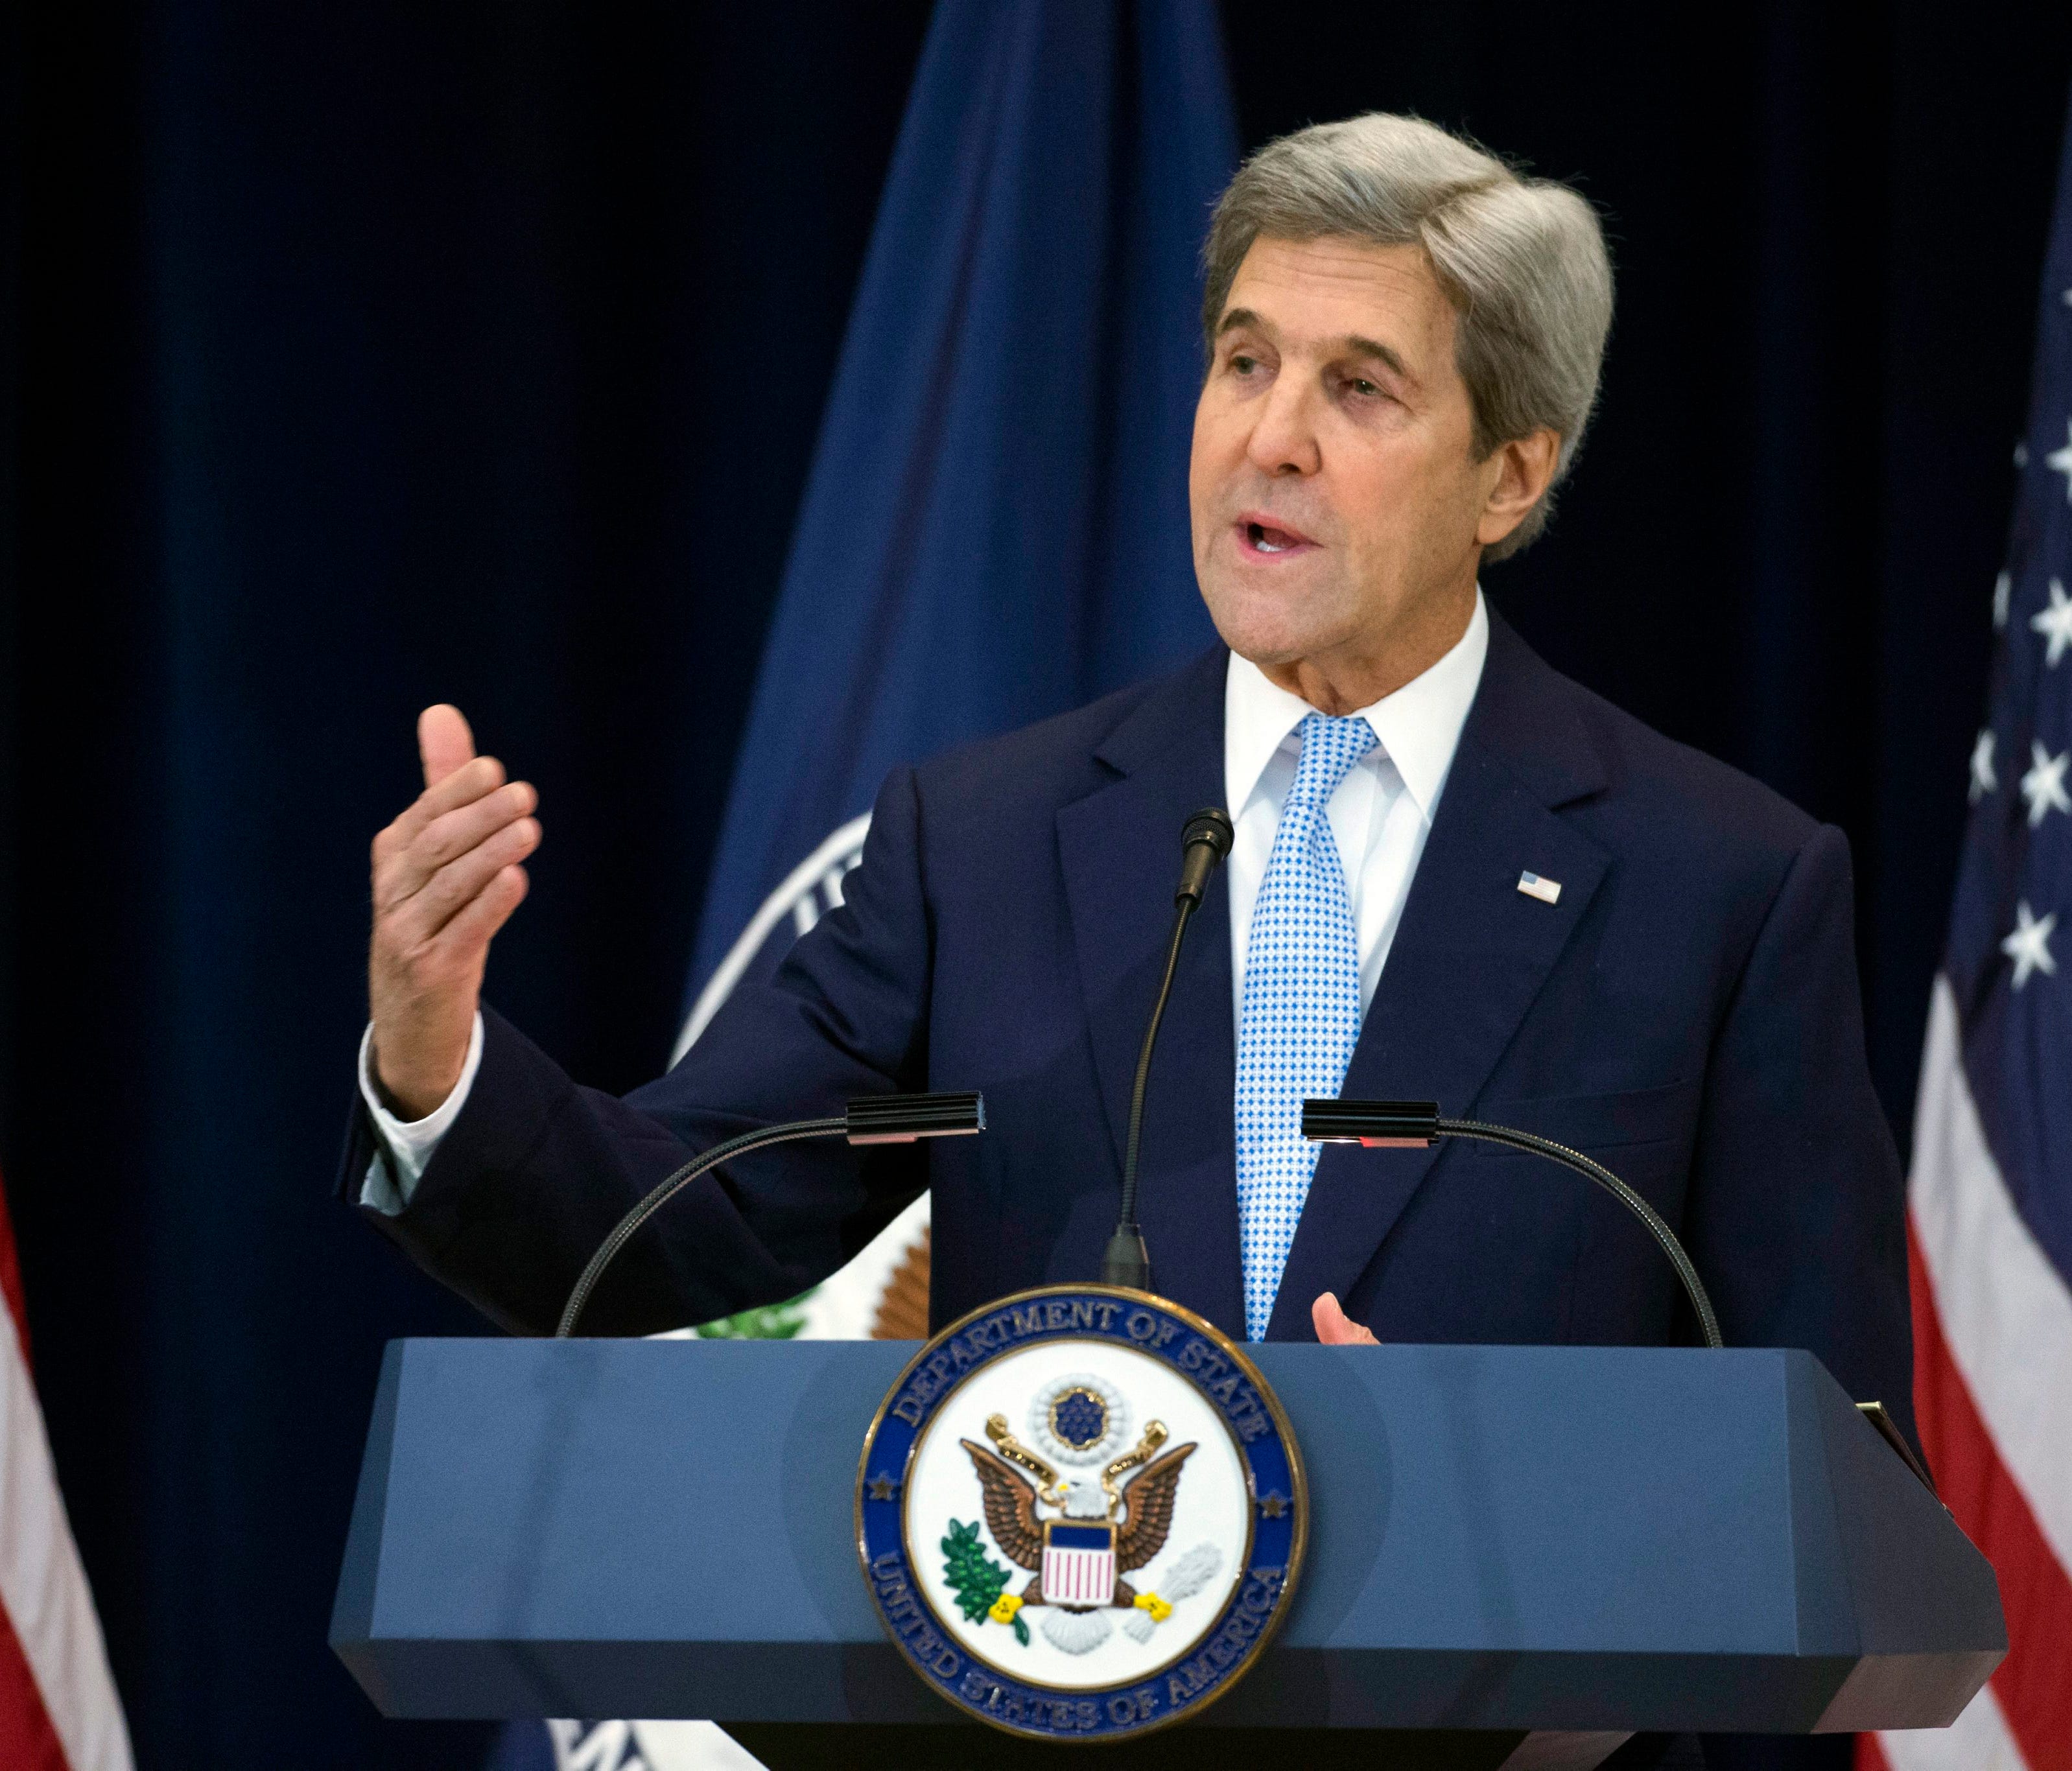 U.S. Secretary of State John Kerry delivers remarks outlining the Obama administration's vision for a Middle East Peace deal at the State Department in Washington, D.C. on Dec. 28, 2016.